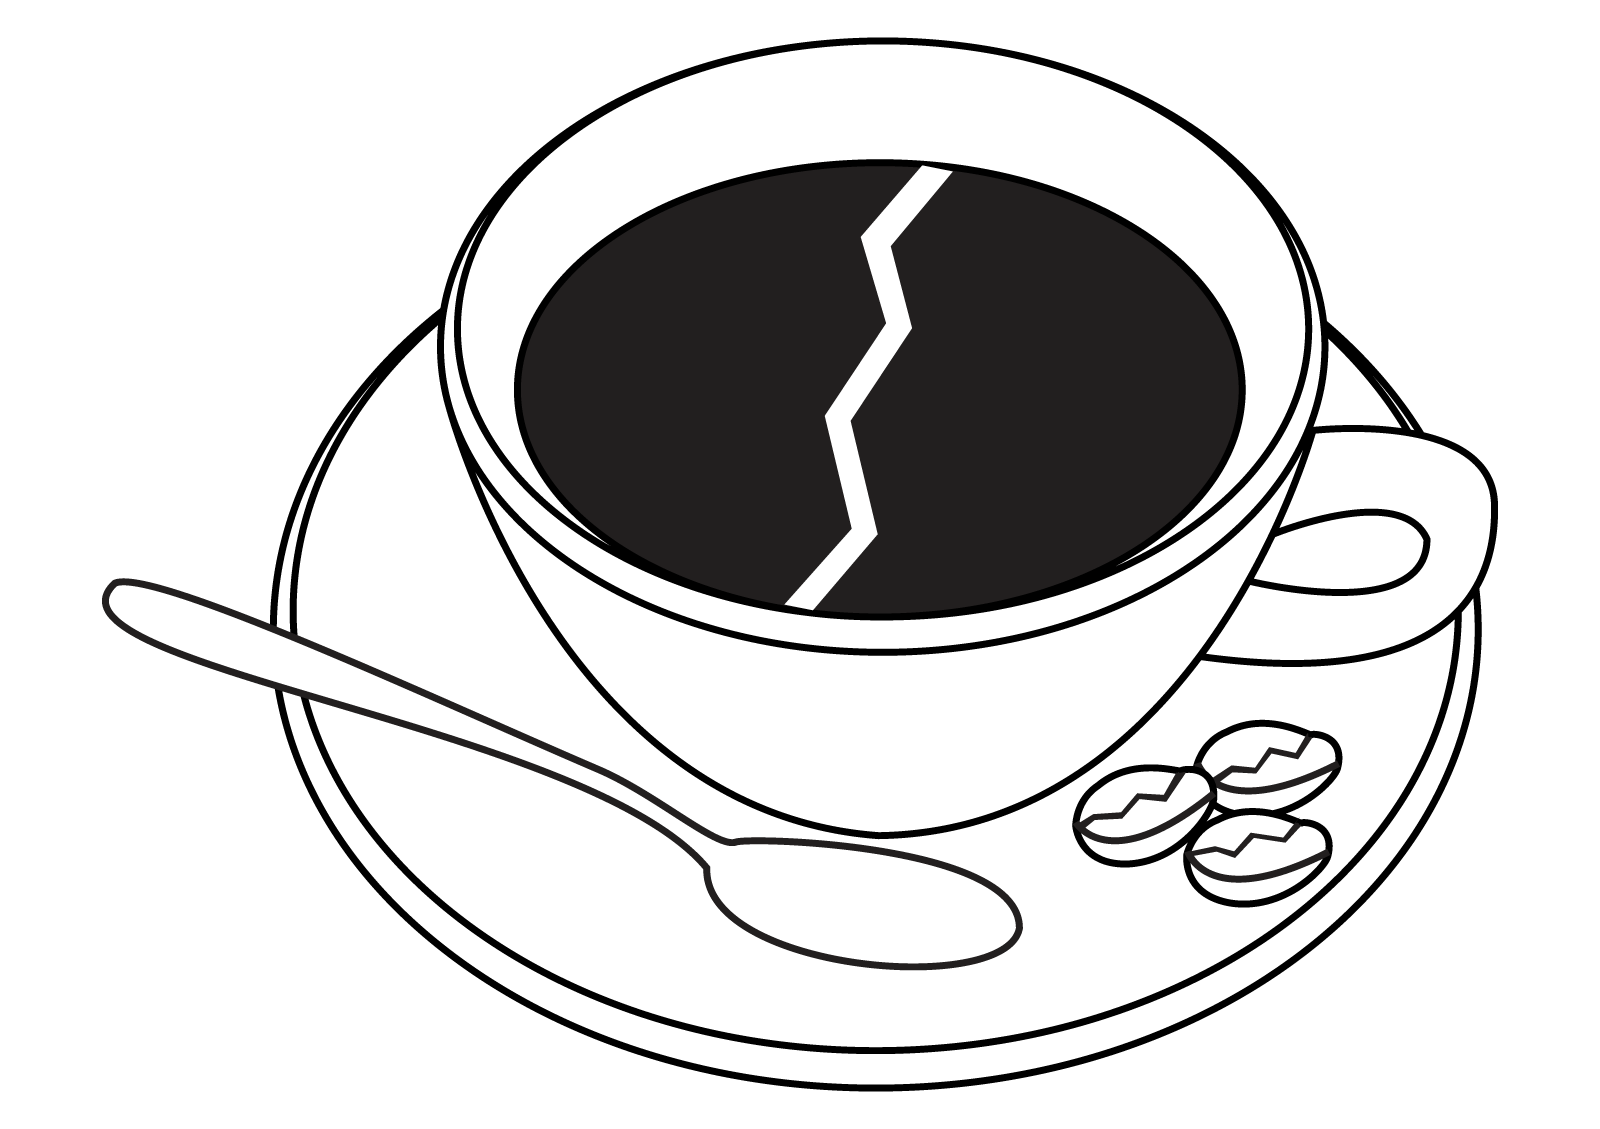 Cup of Coffee designed with Illustrator